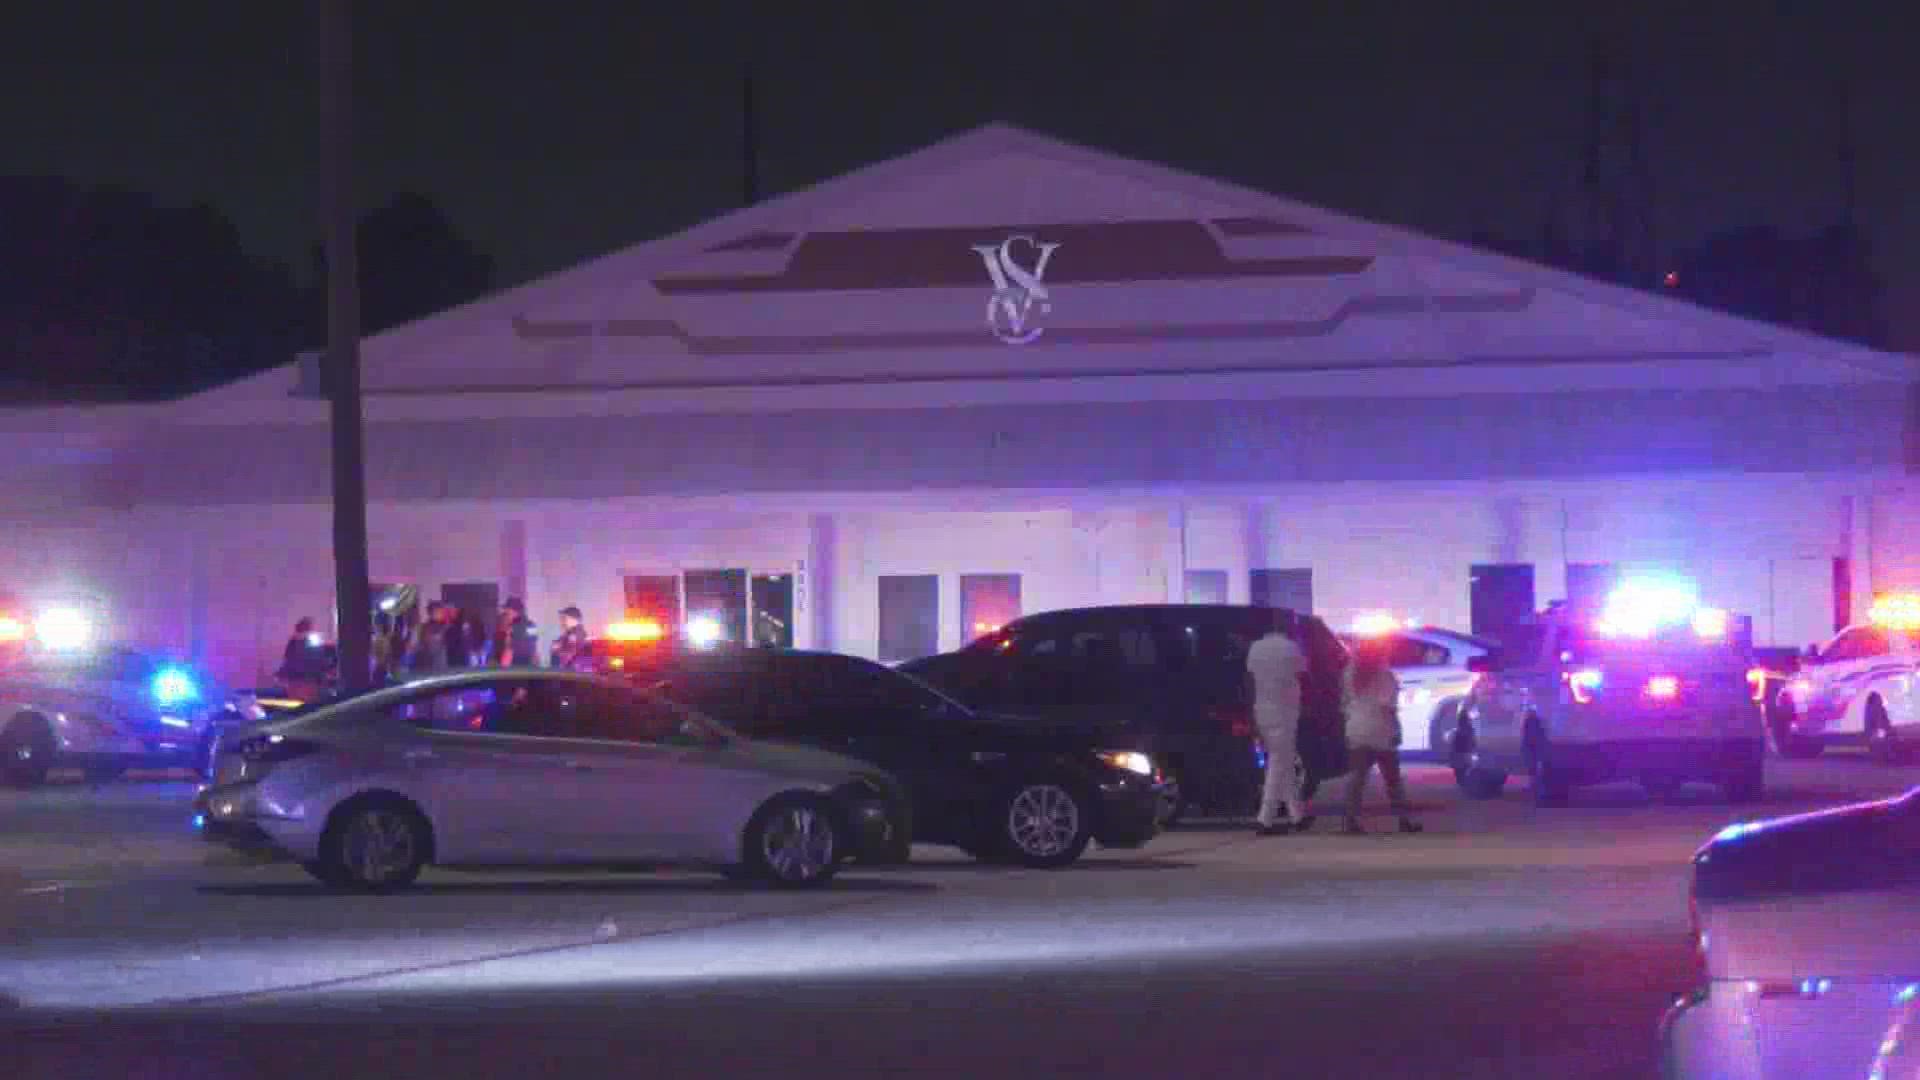 Deputies said multiple gunmen were involved in the shooting at a nightclub about 2 a.m. Sunday on FM 1960.